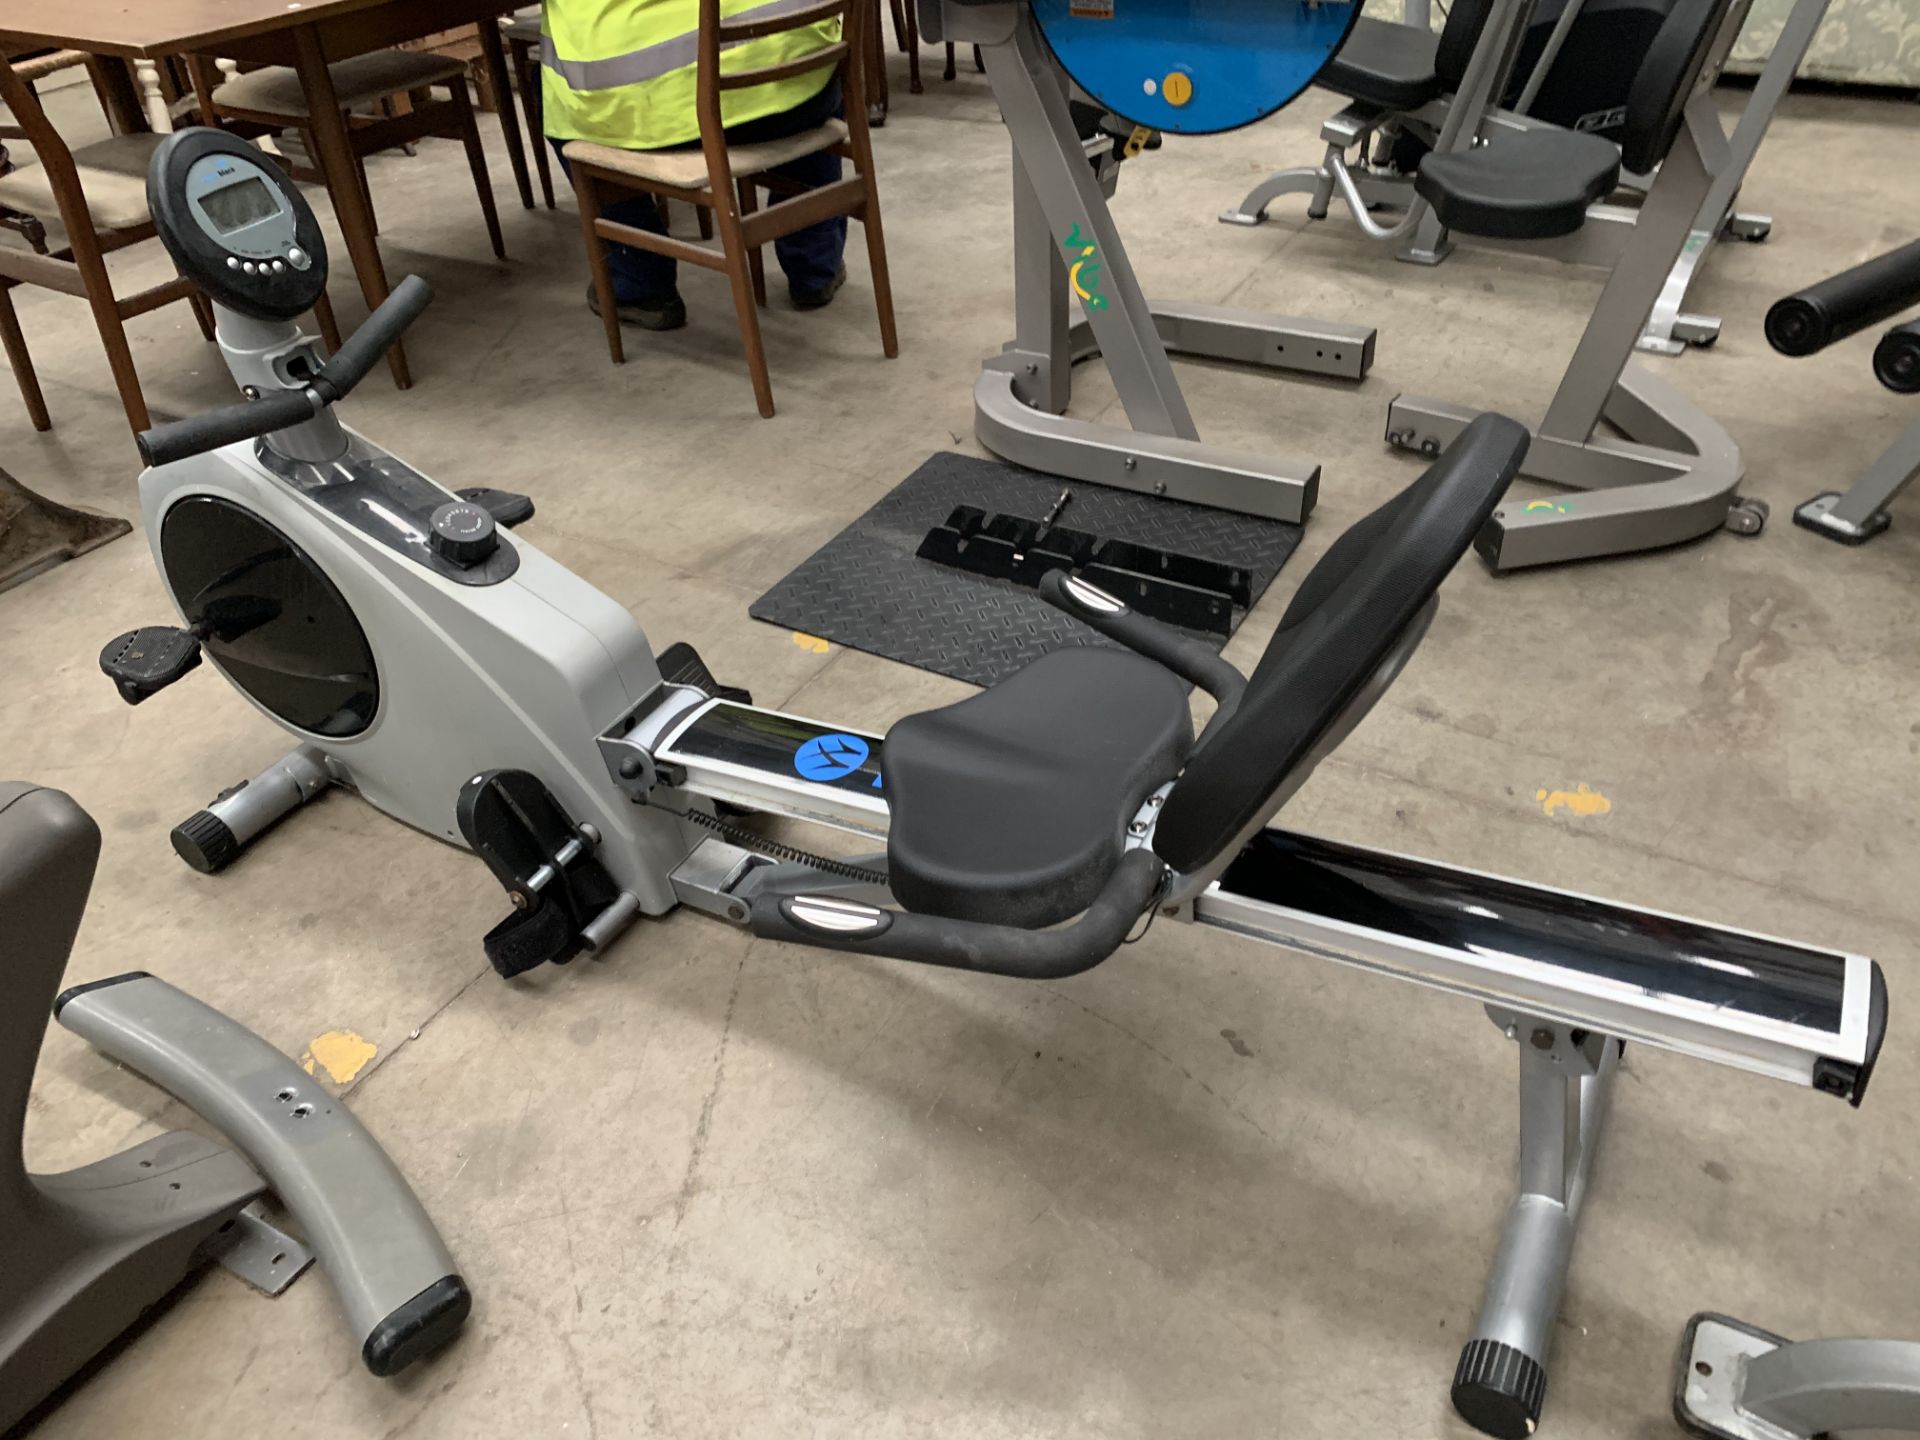 A Roger Black exercise rowing machine